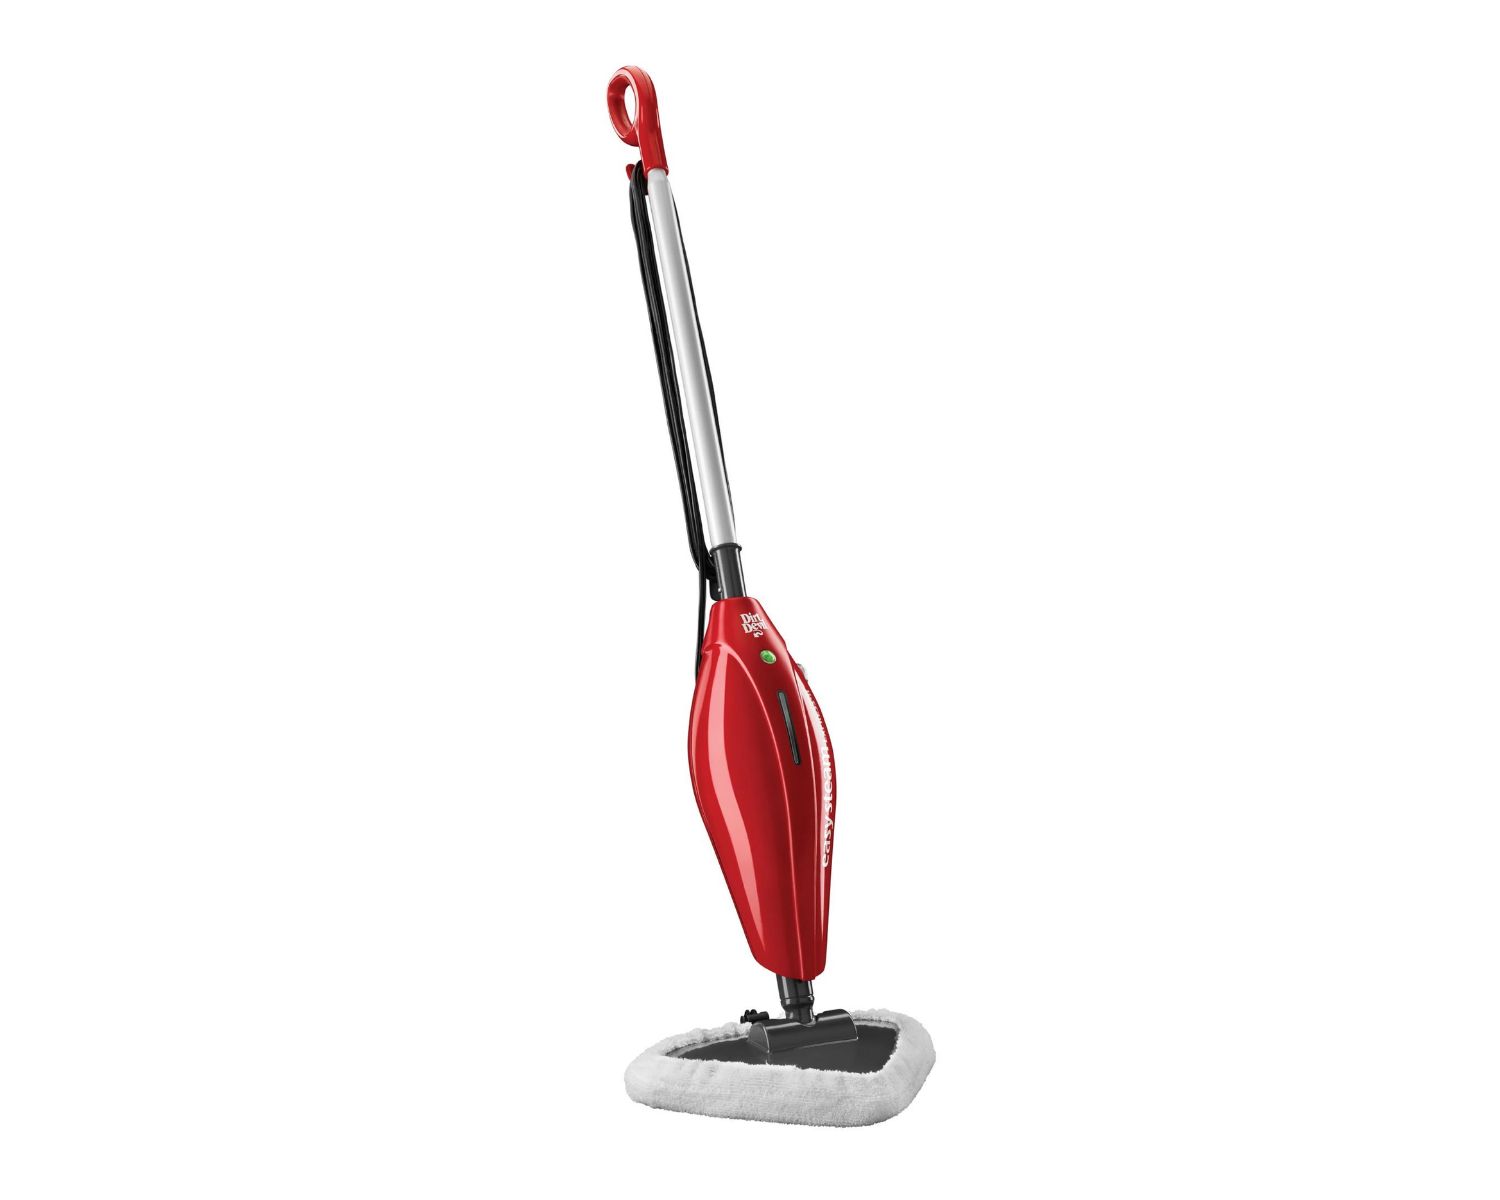 How To Use Dirt Devil Steam Mop